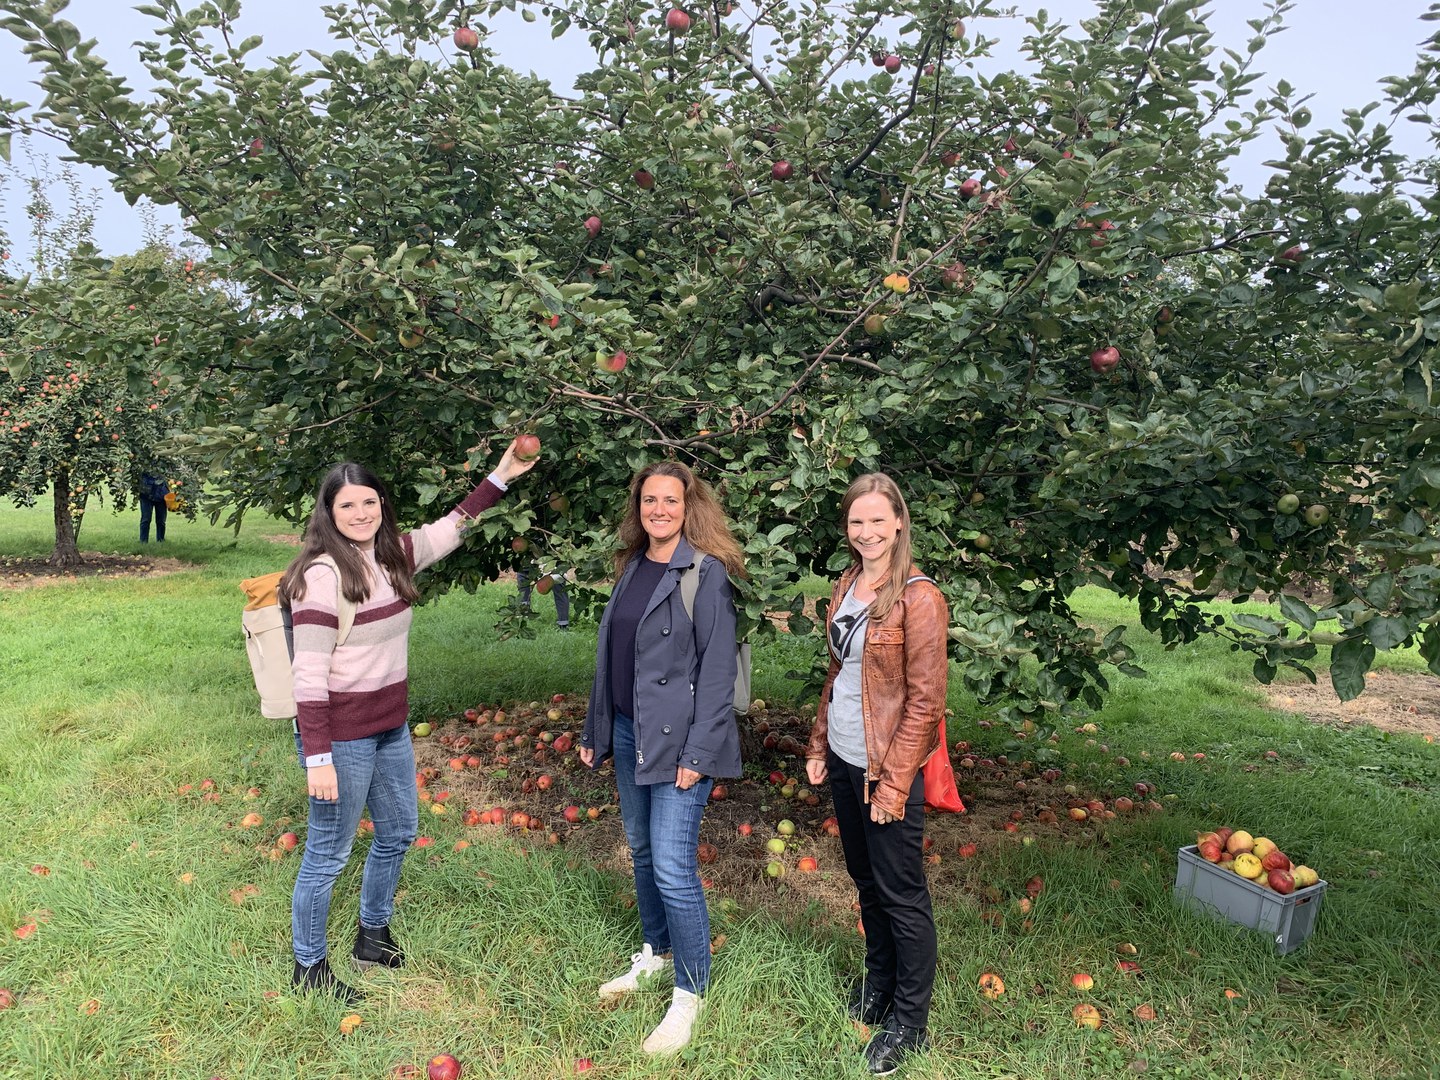 “Team N” during the apple harvest in “Sustainable September.”